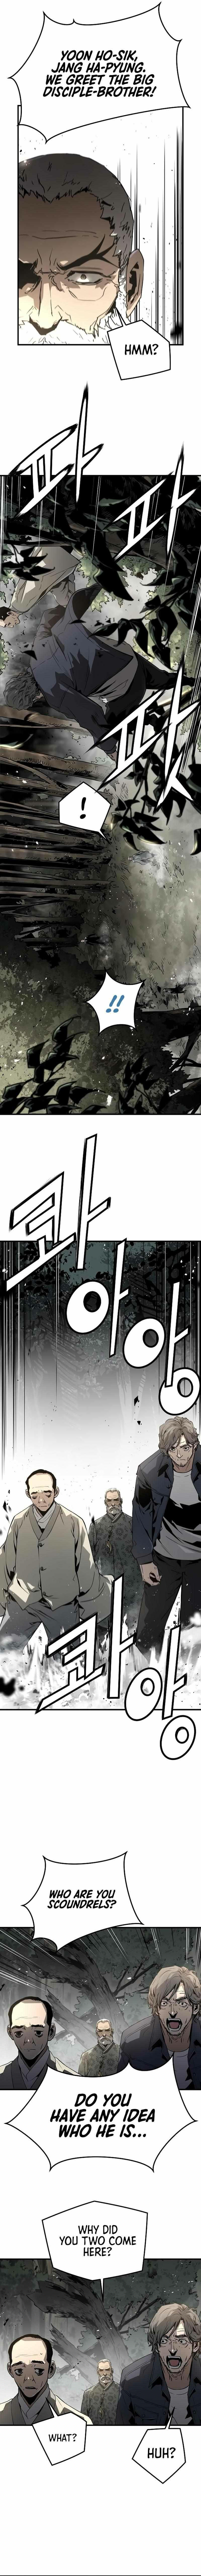 The Breaker: Eternal Force Chapter 87 page 14 - 